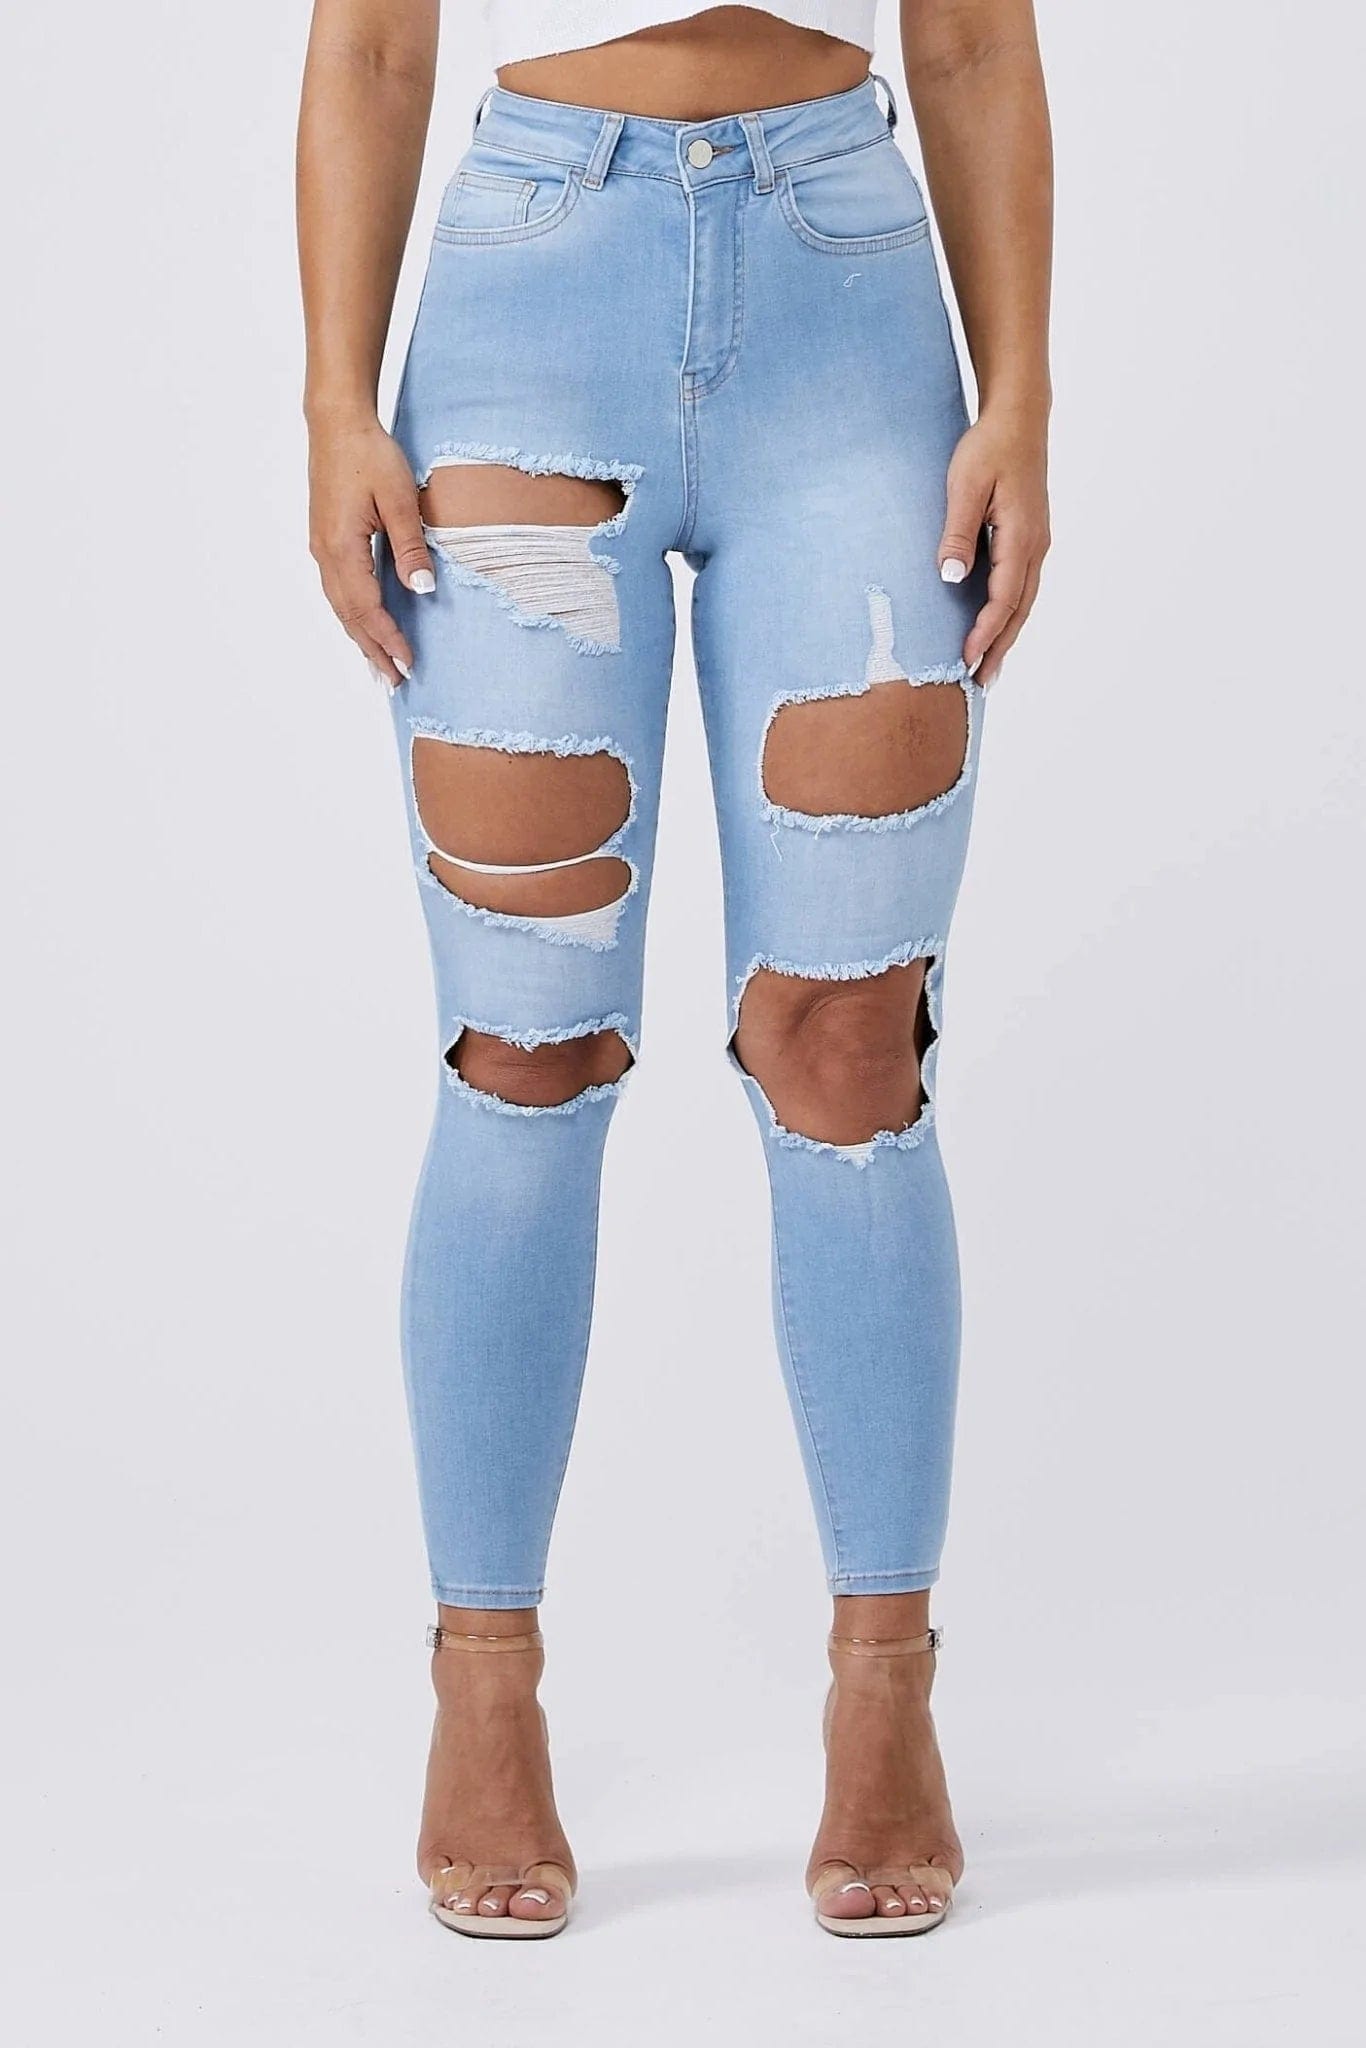 40098 Women's High Waisted Distressed Skinny Jeans With Cut, 56% OFF